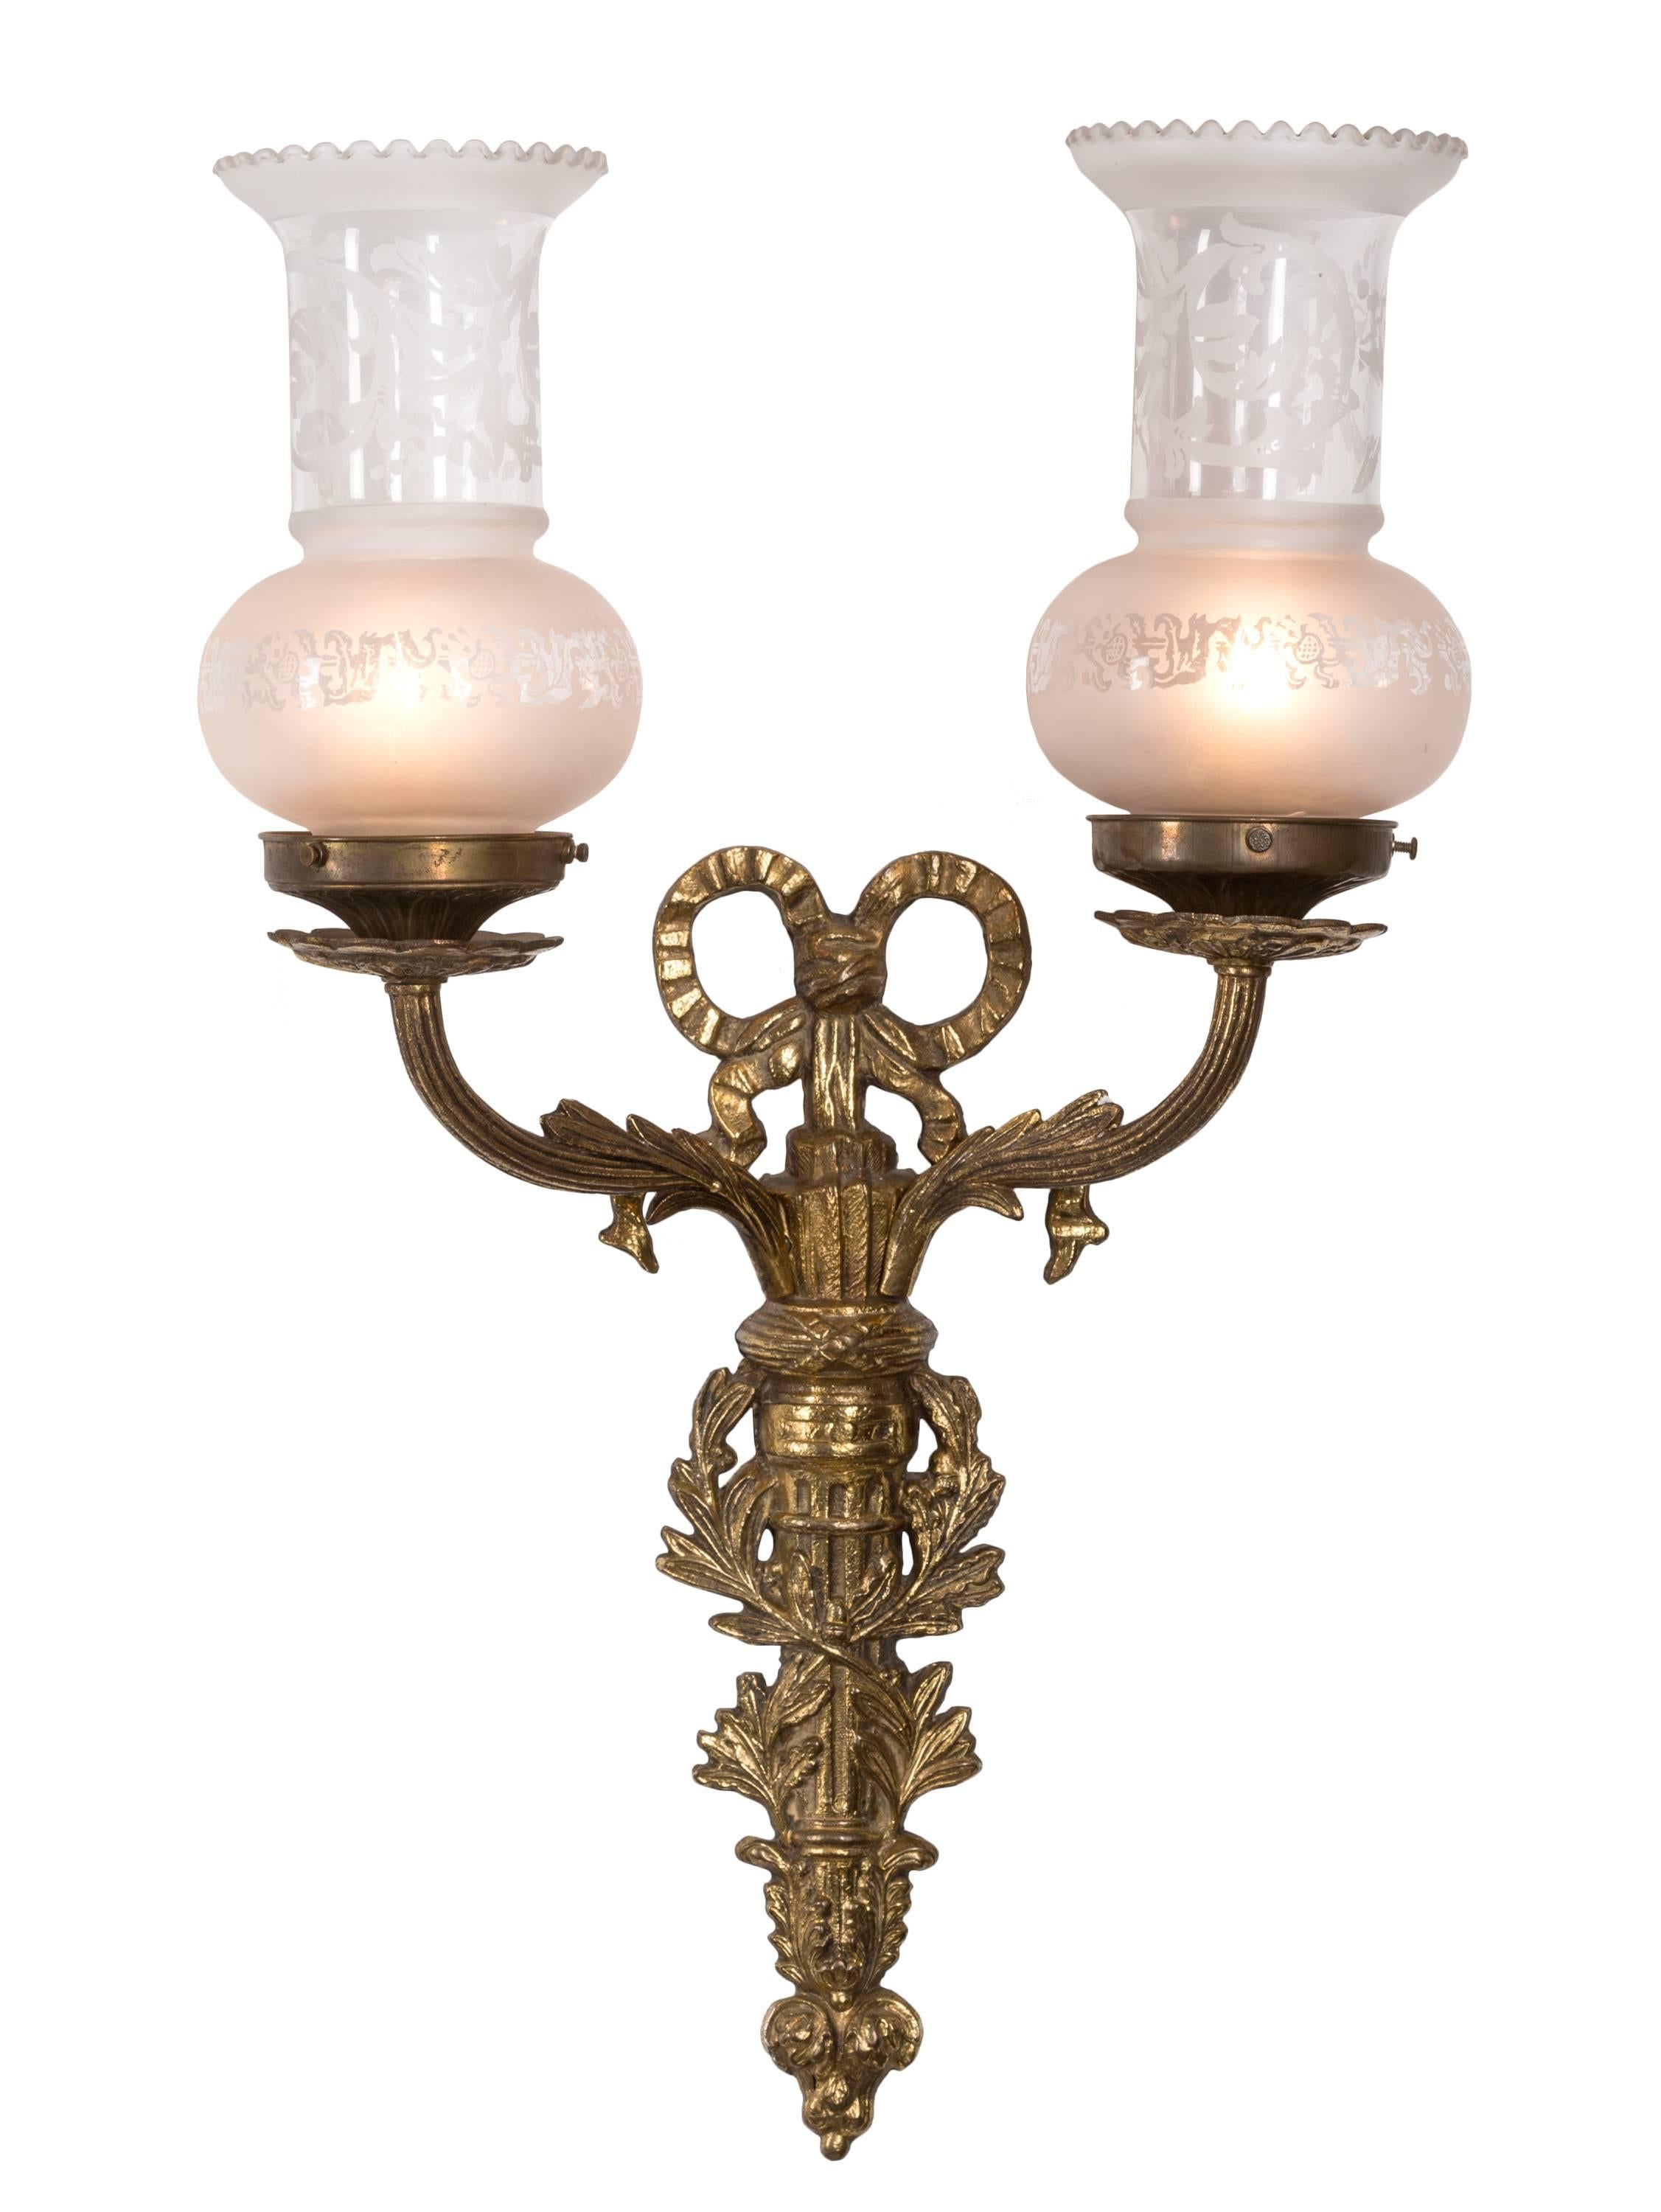 A very nice matched pair of Louis XVI style bronze wall sconces, each having two electric sockets with frosted glass chimneys in 